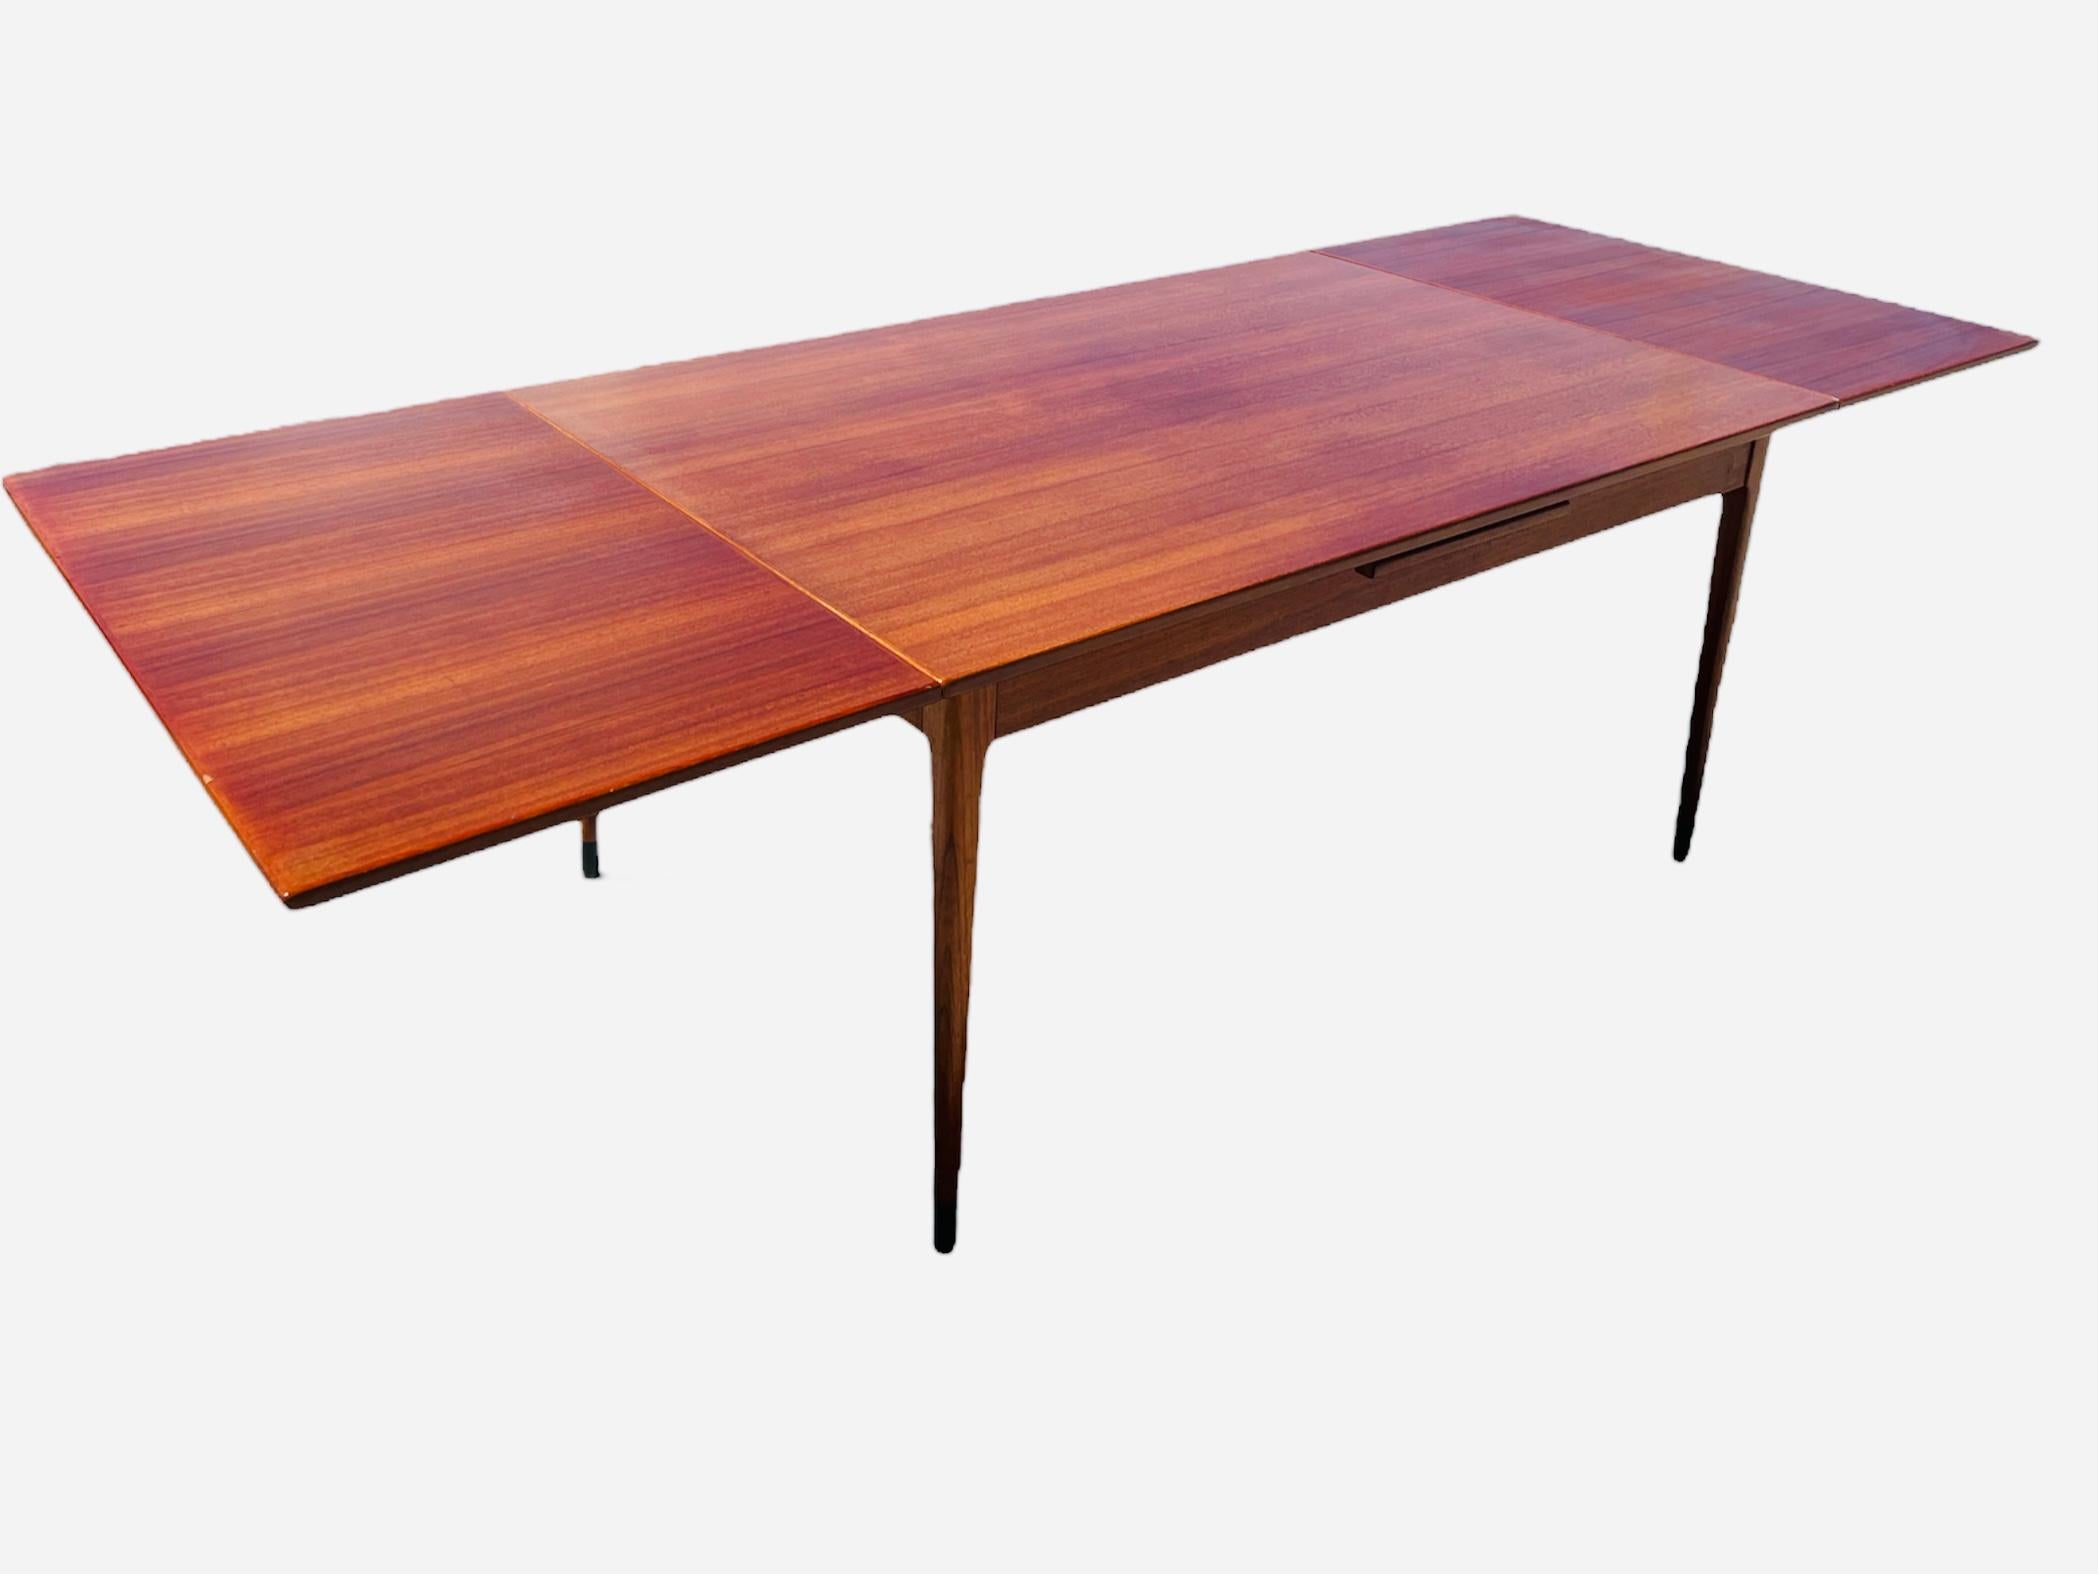 20th Century JL Niels Moller Extendable Teak Dining Table with Original Invoice 1964, No. 9C